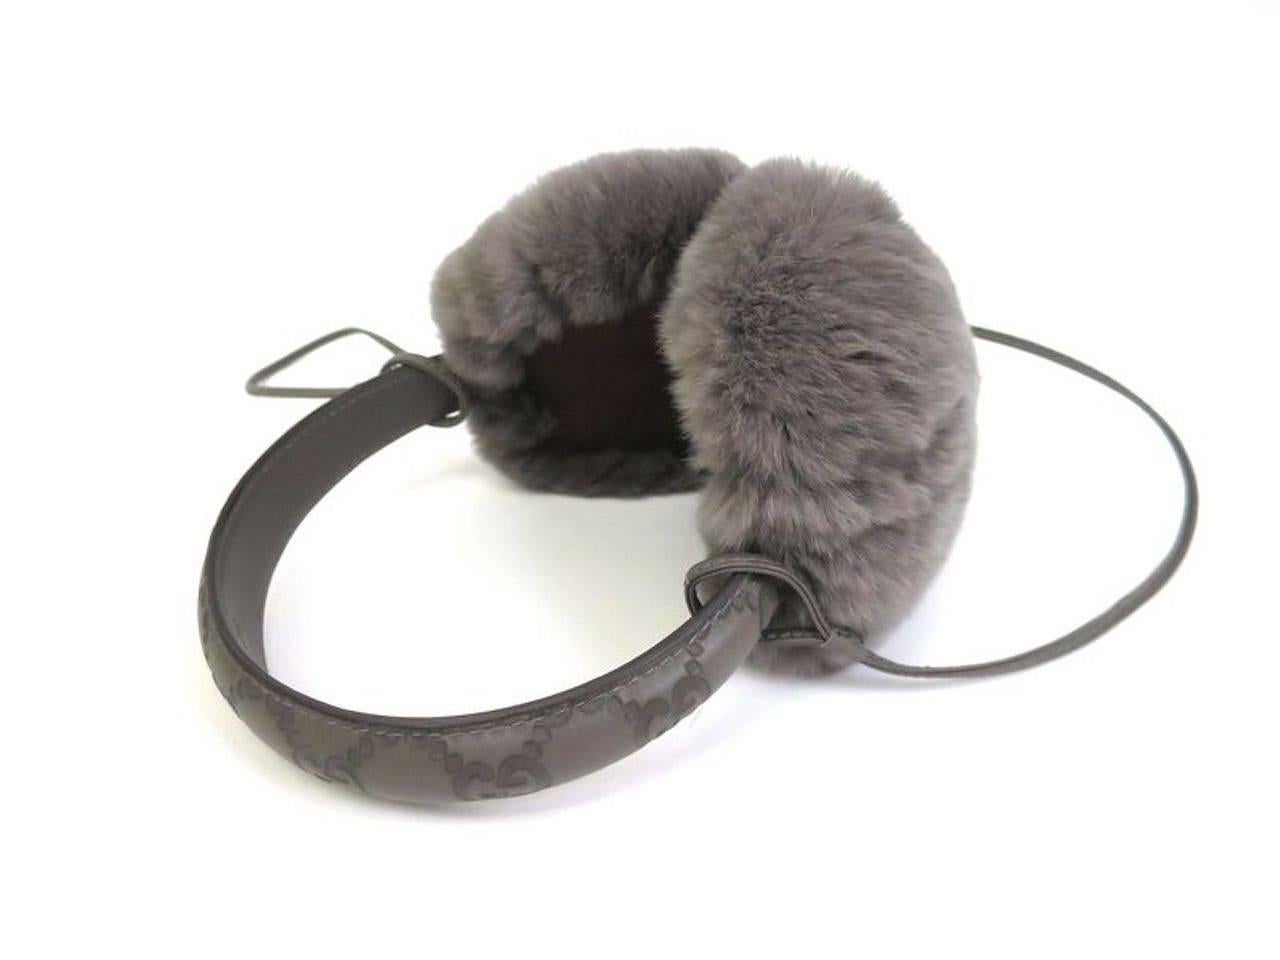 CURATOR'S NOTES

Gucci NEW Monogram Logo Fur Men's Women's Unisex Ear Muffs in Box 

Fur (Rabbit)
Leather trim
Made in Italy
Headband length 30"
Measures 6" W x 8" H x 5" D
Includes original Gucci dust bag and box